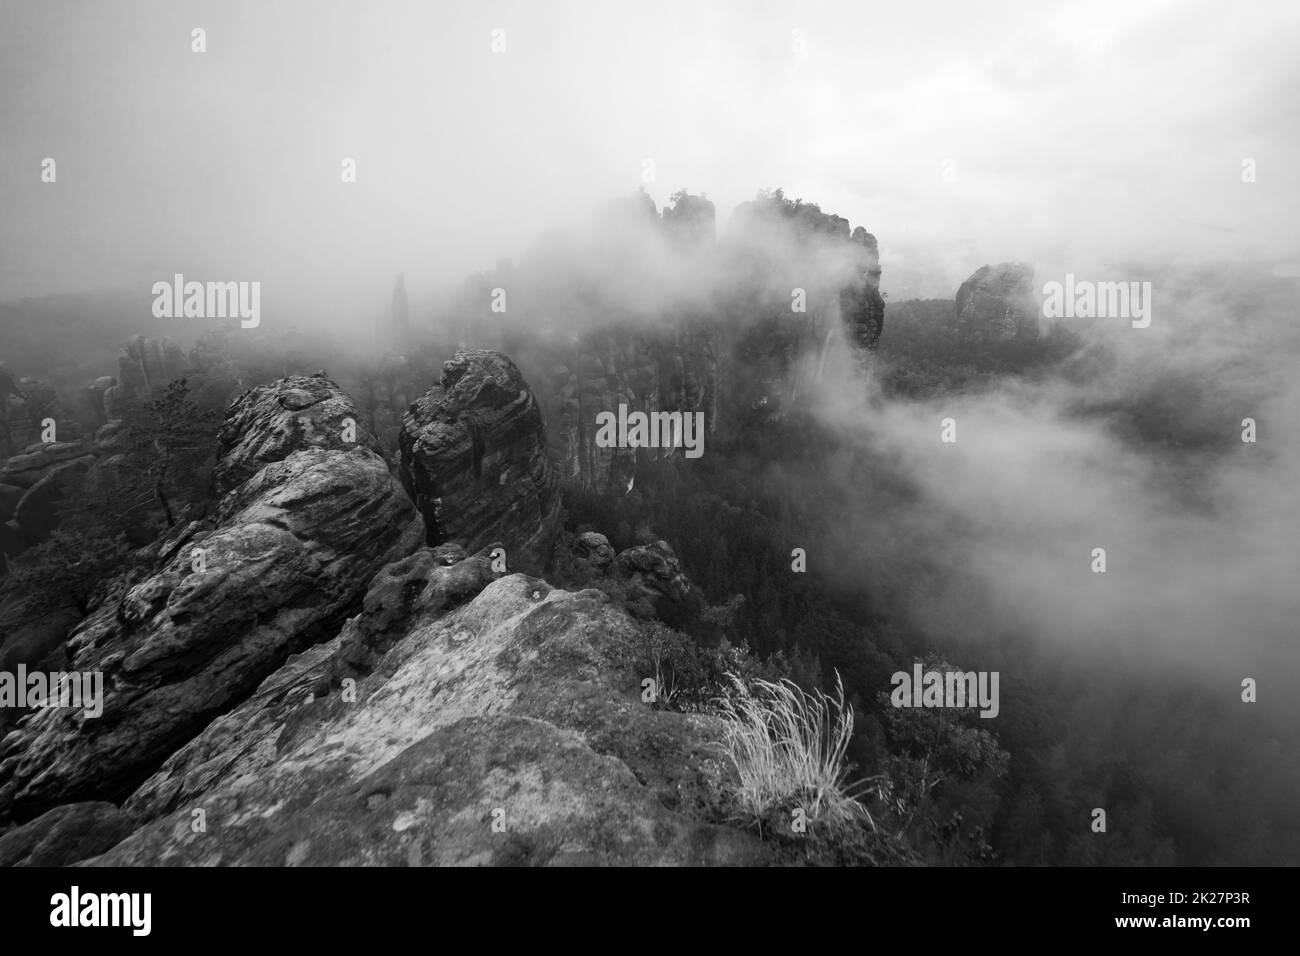 An early cloudy morning in mountain. Schrammsteine - group of rocks are a long, strung-out, very jagged in the Elbe Sandstone Mountains located in Saxon Switzerland in East Germany. Black and white. Stock Photo